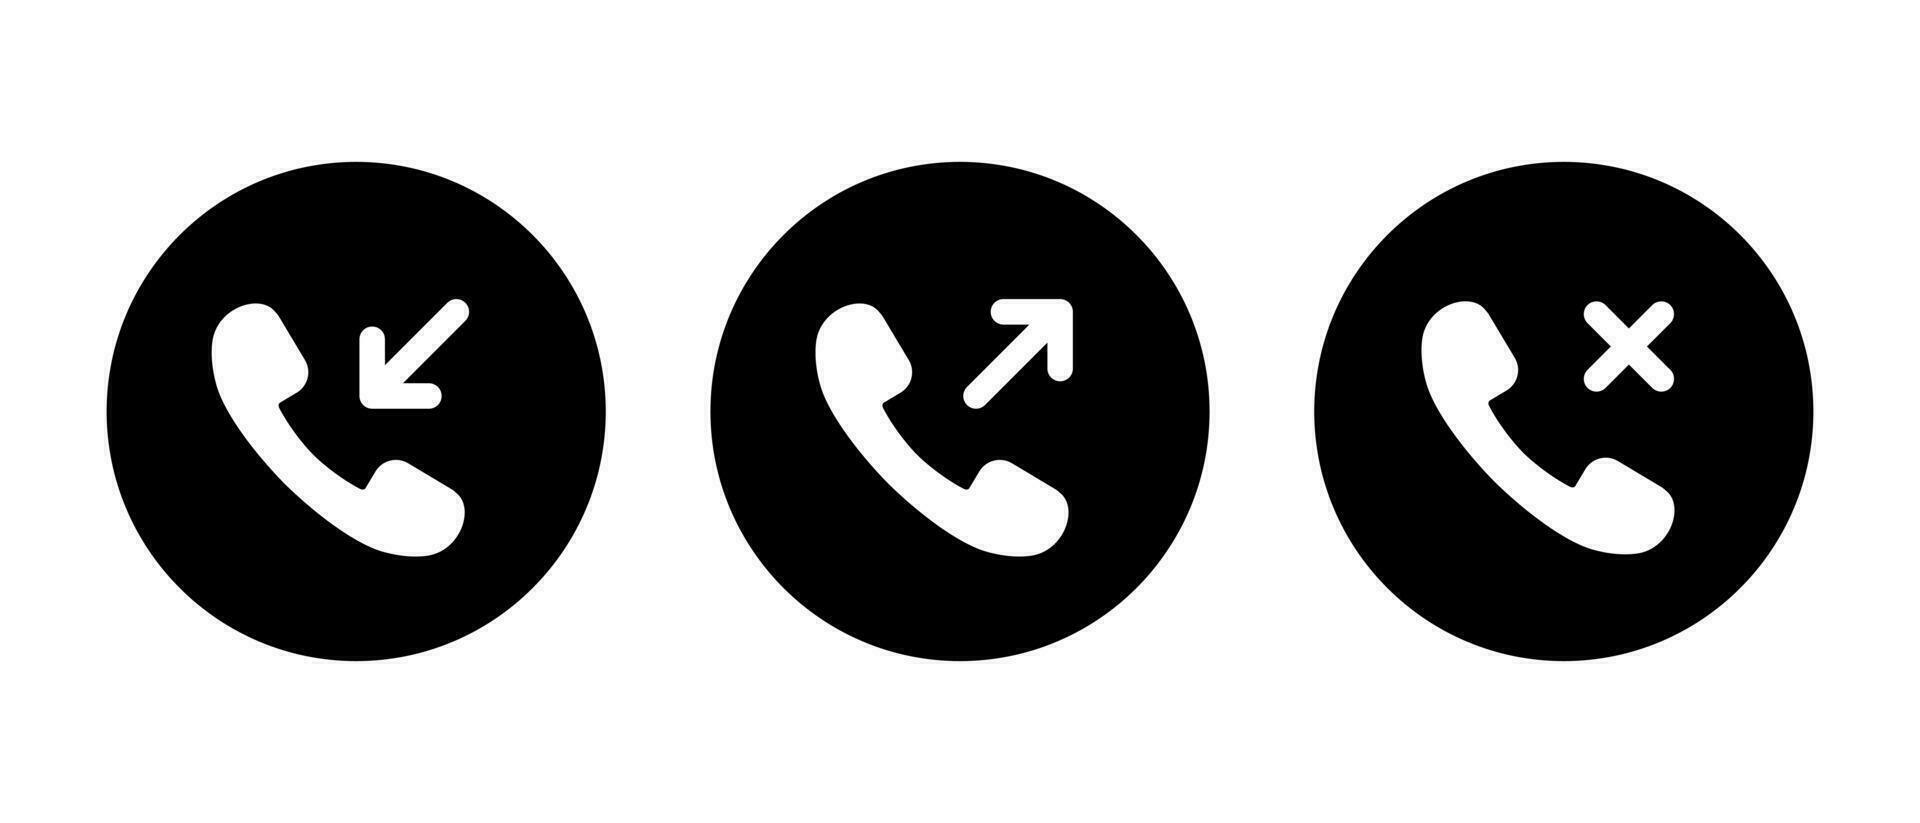 Incoming and outgoing, missed call button icon. Calling history symbol vector